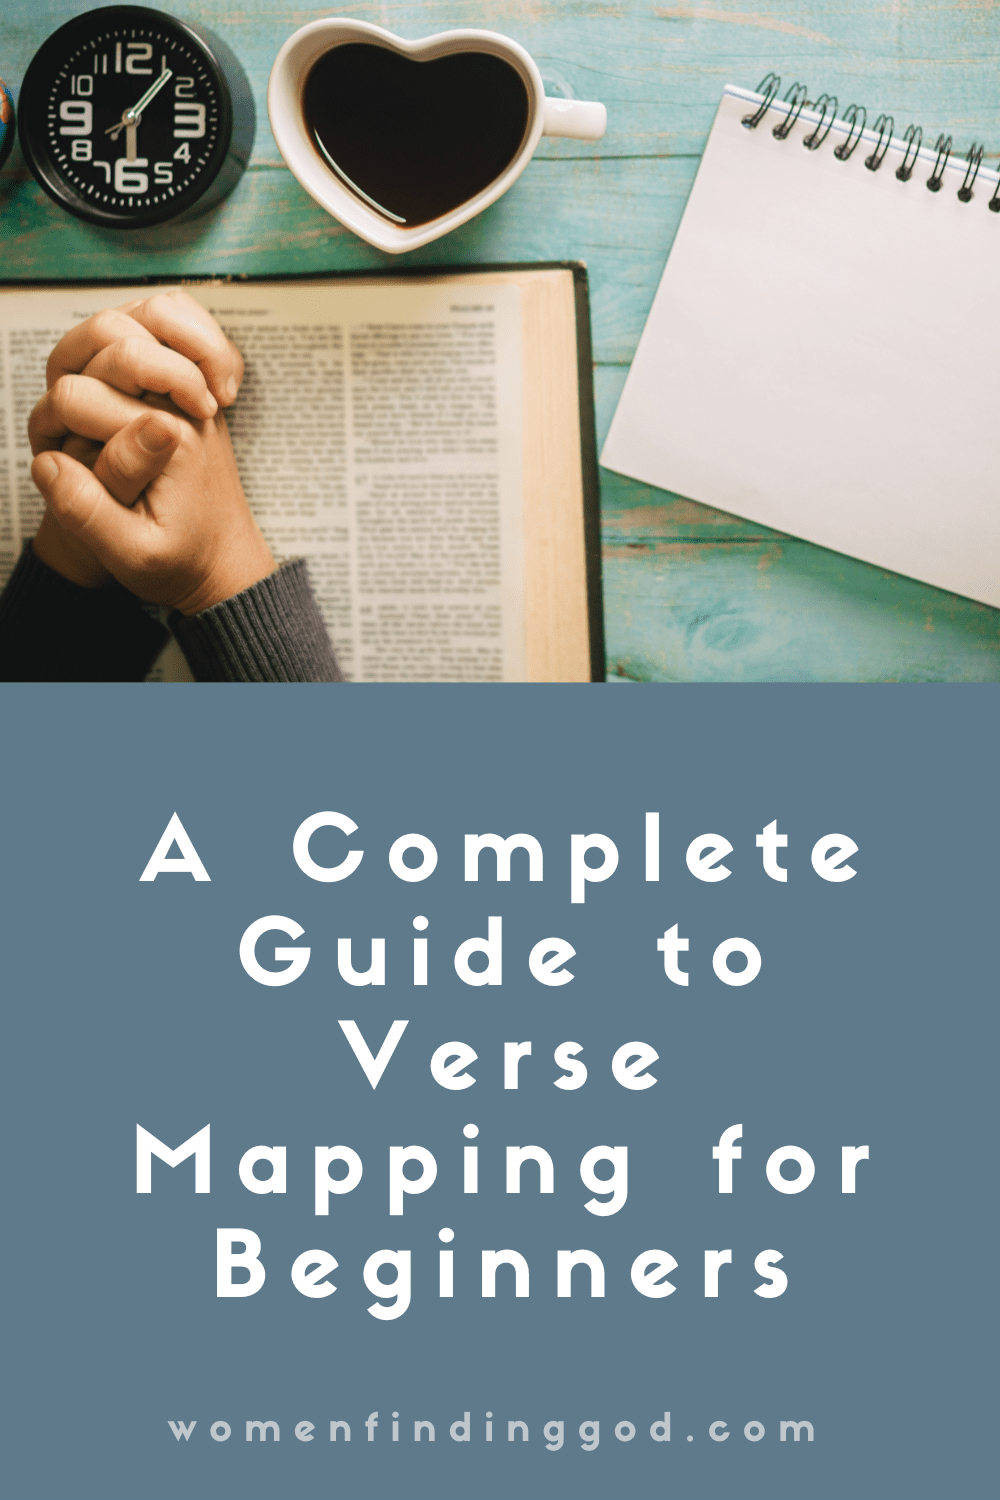 Are you ready for an easy way to study the bible? Learn the 6 steps to verse mapping the bible and why this should be part of your quiet time with God. Plus, tips about how to take this bible study method for beginners deeper and the must-have bible study tools for verse mapping.